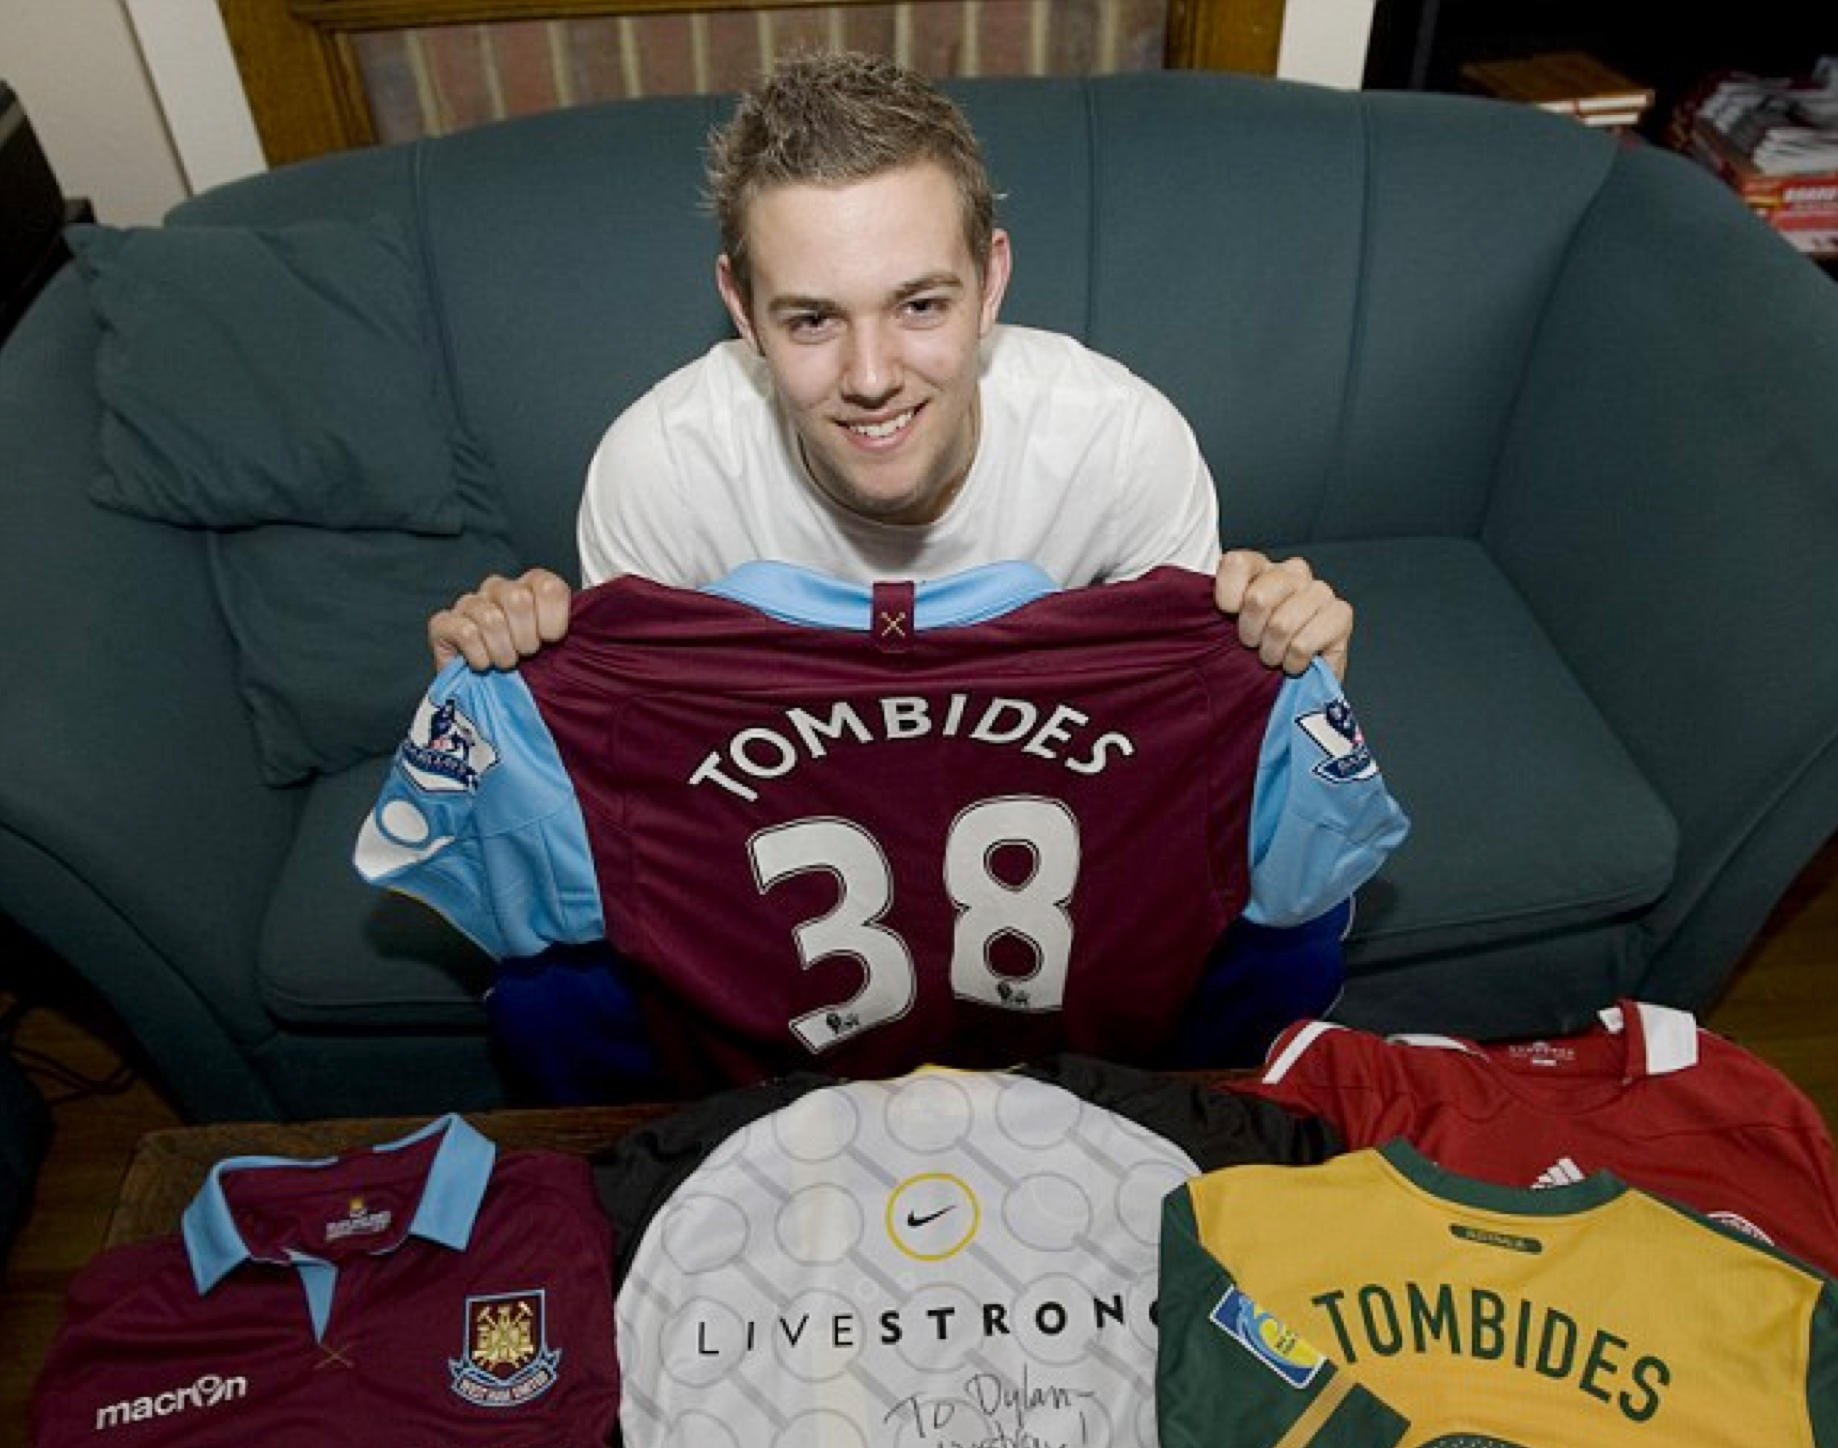 Tombides with his West Ham shirt. Photo: SMP